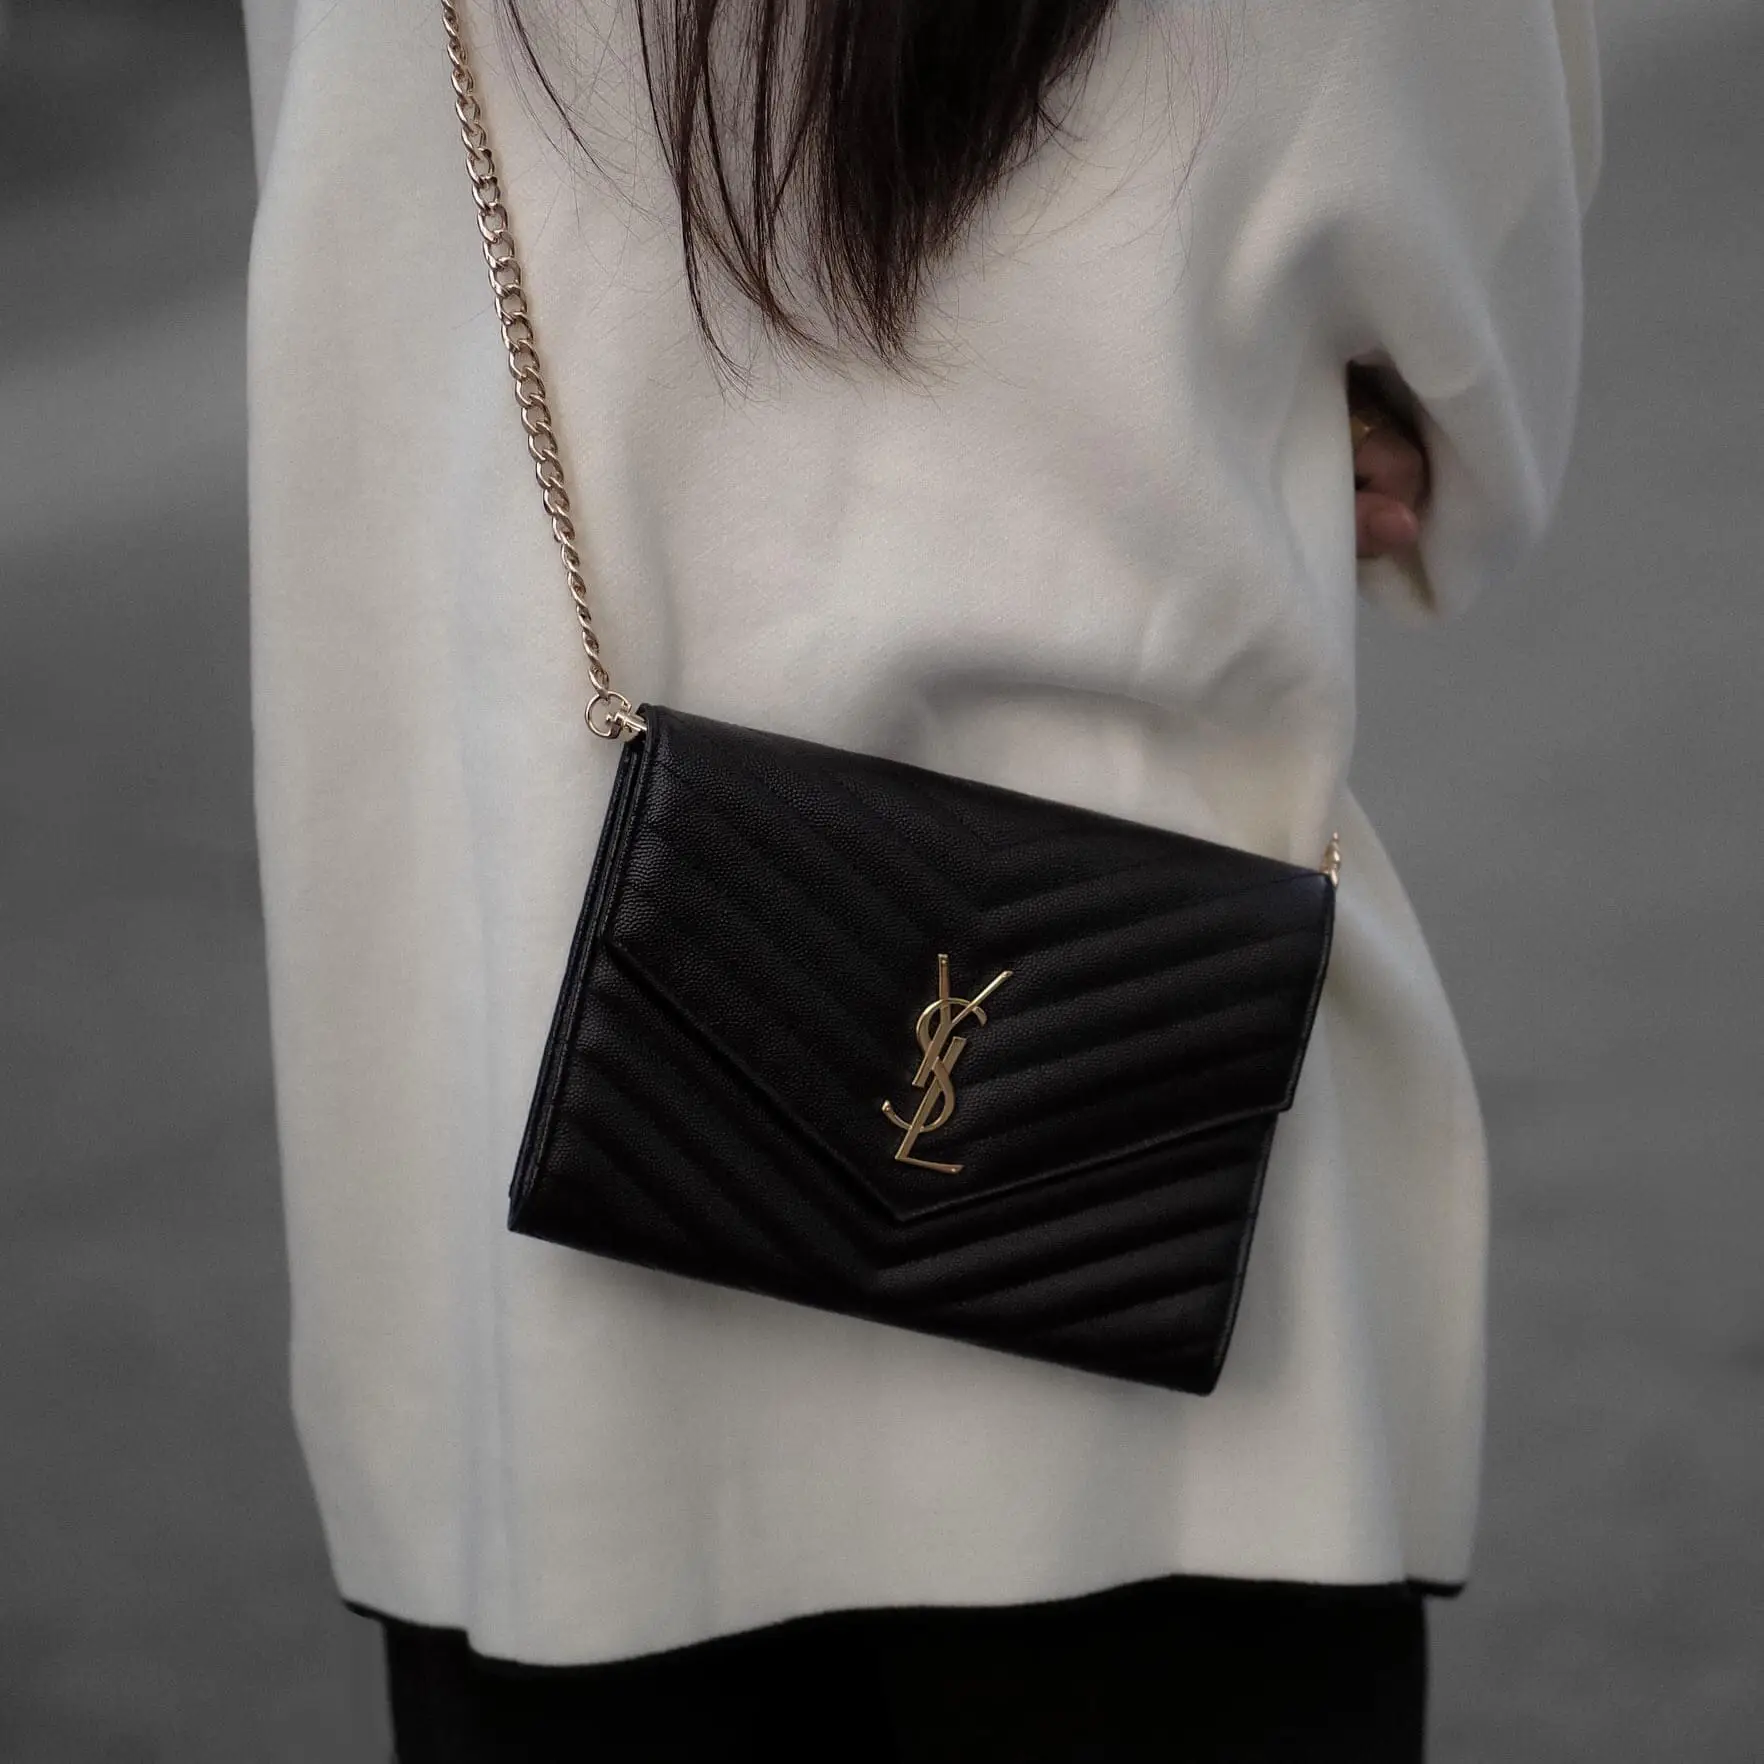 Review) YSL Kate Belt Bag, Gallery posted by Boonny_Hsr